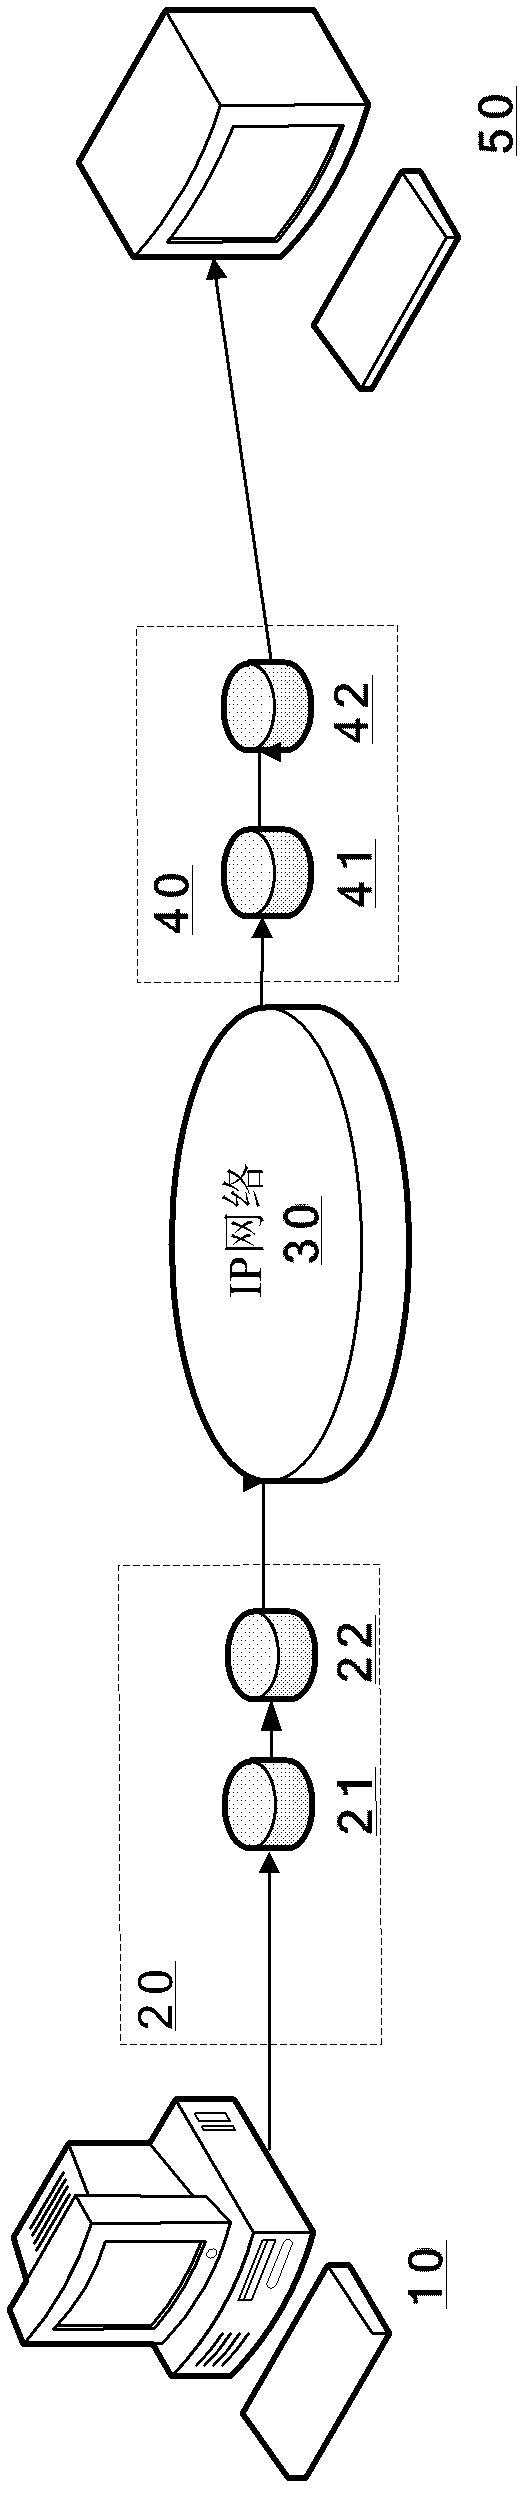 System and method for smart power grid to transmit GOOSE messages across wide area network